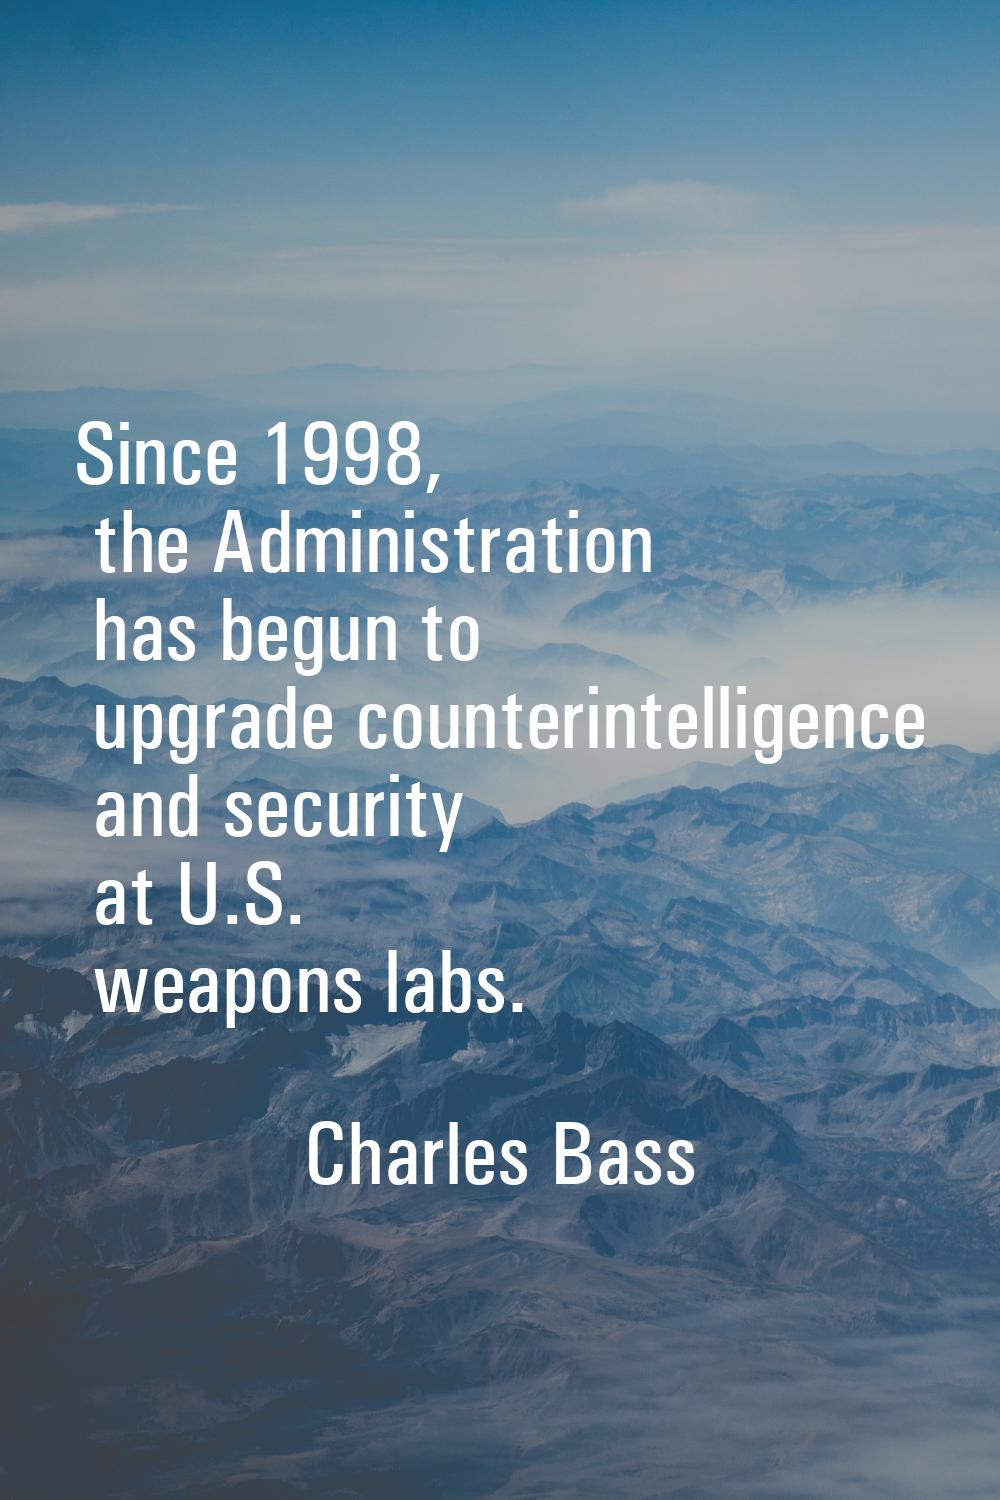 Since 1998, the Administration has begun to upgrade counterintelligence and security at U.S. weapon